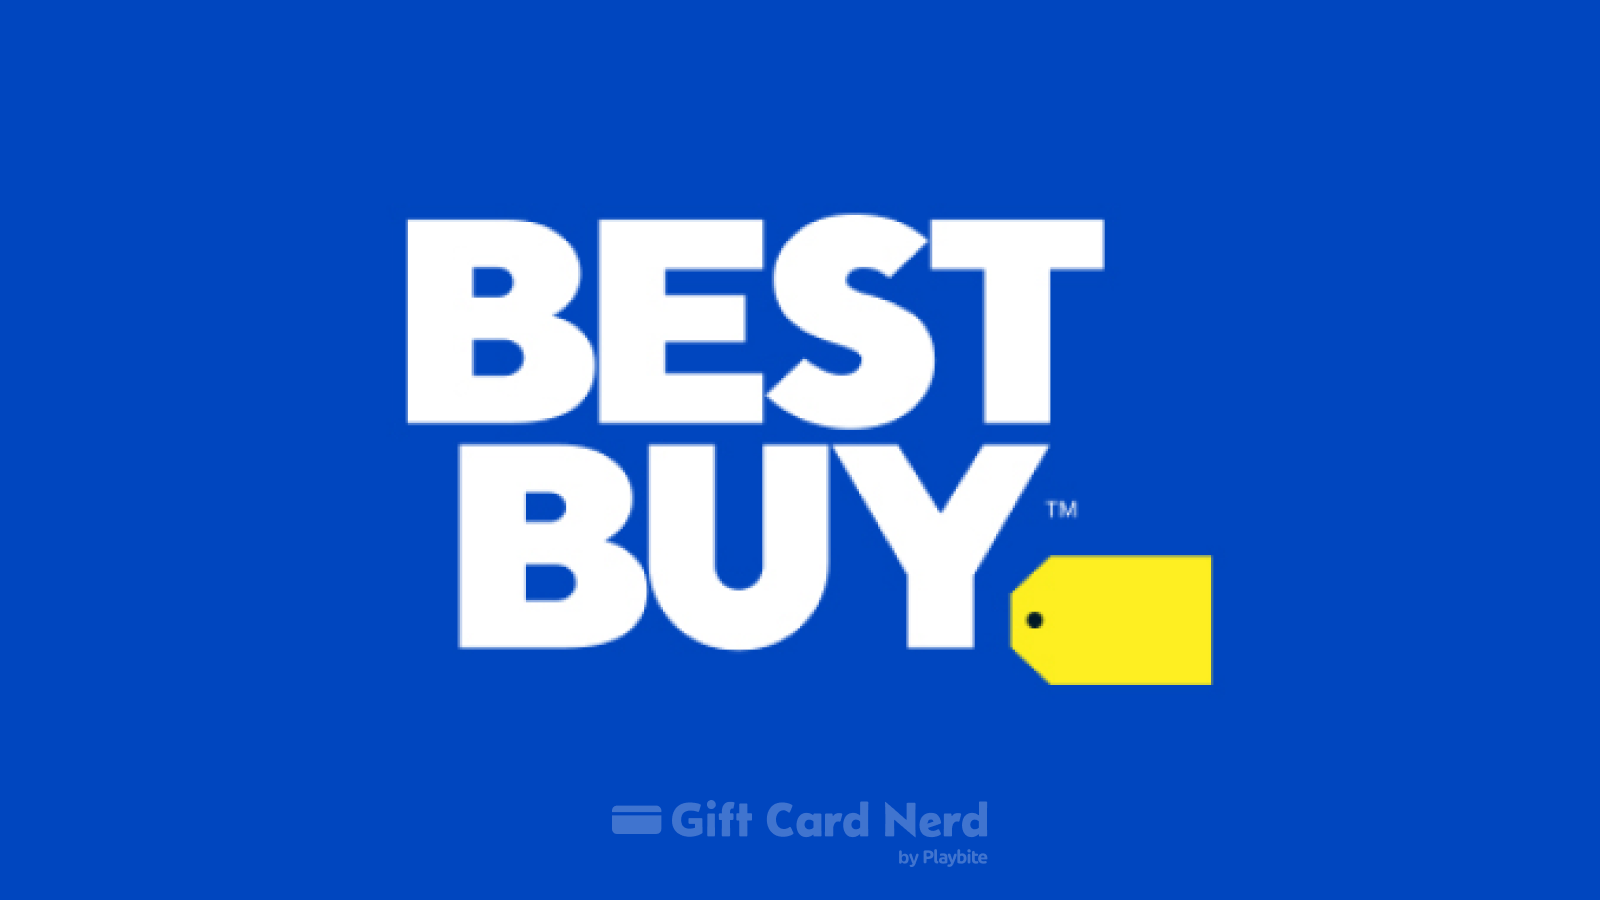 Can I Use a Best Buy Gift Card on Uber Eats?